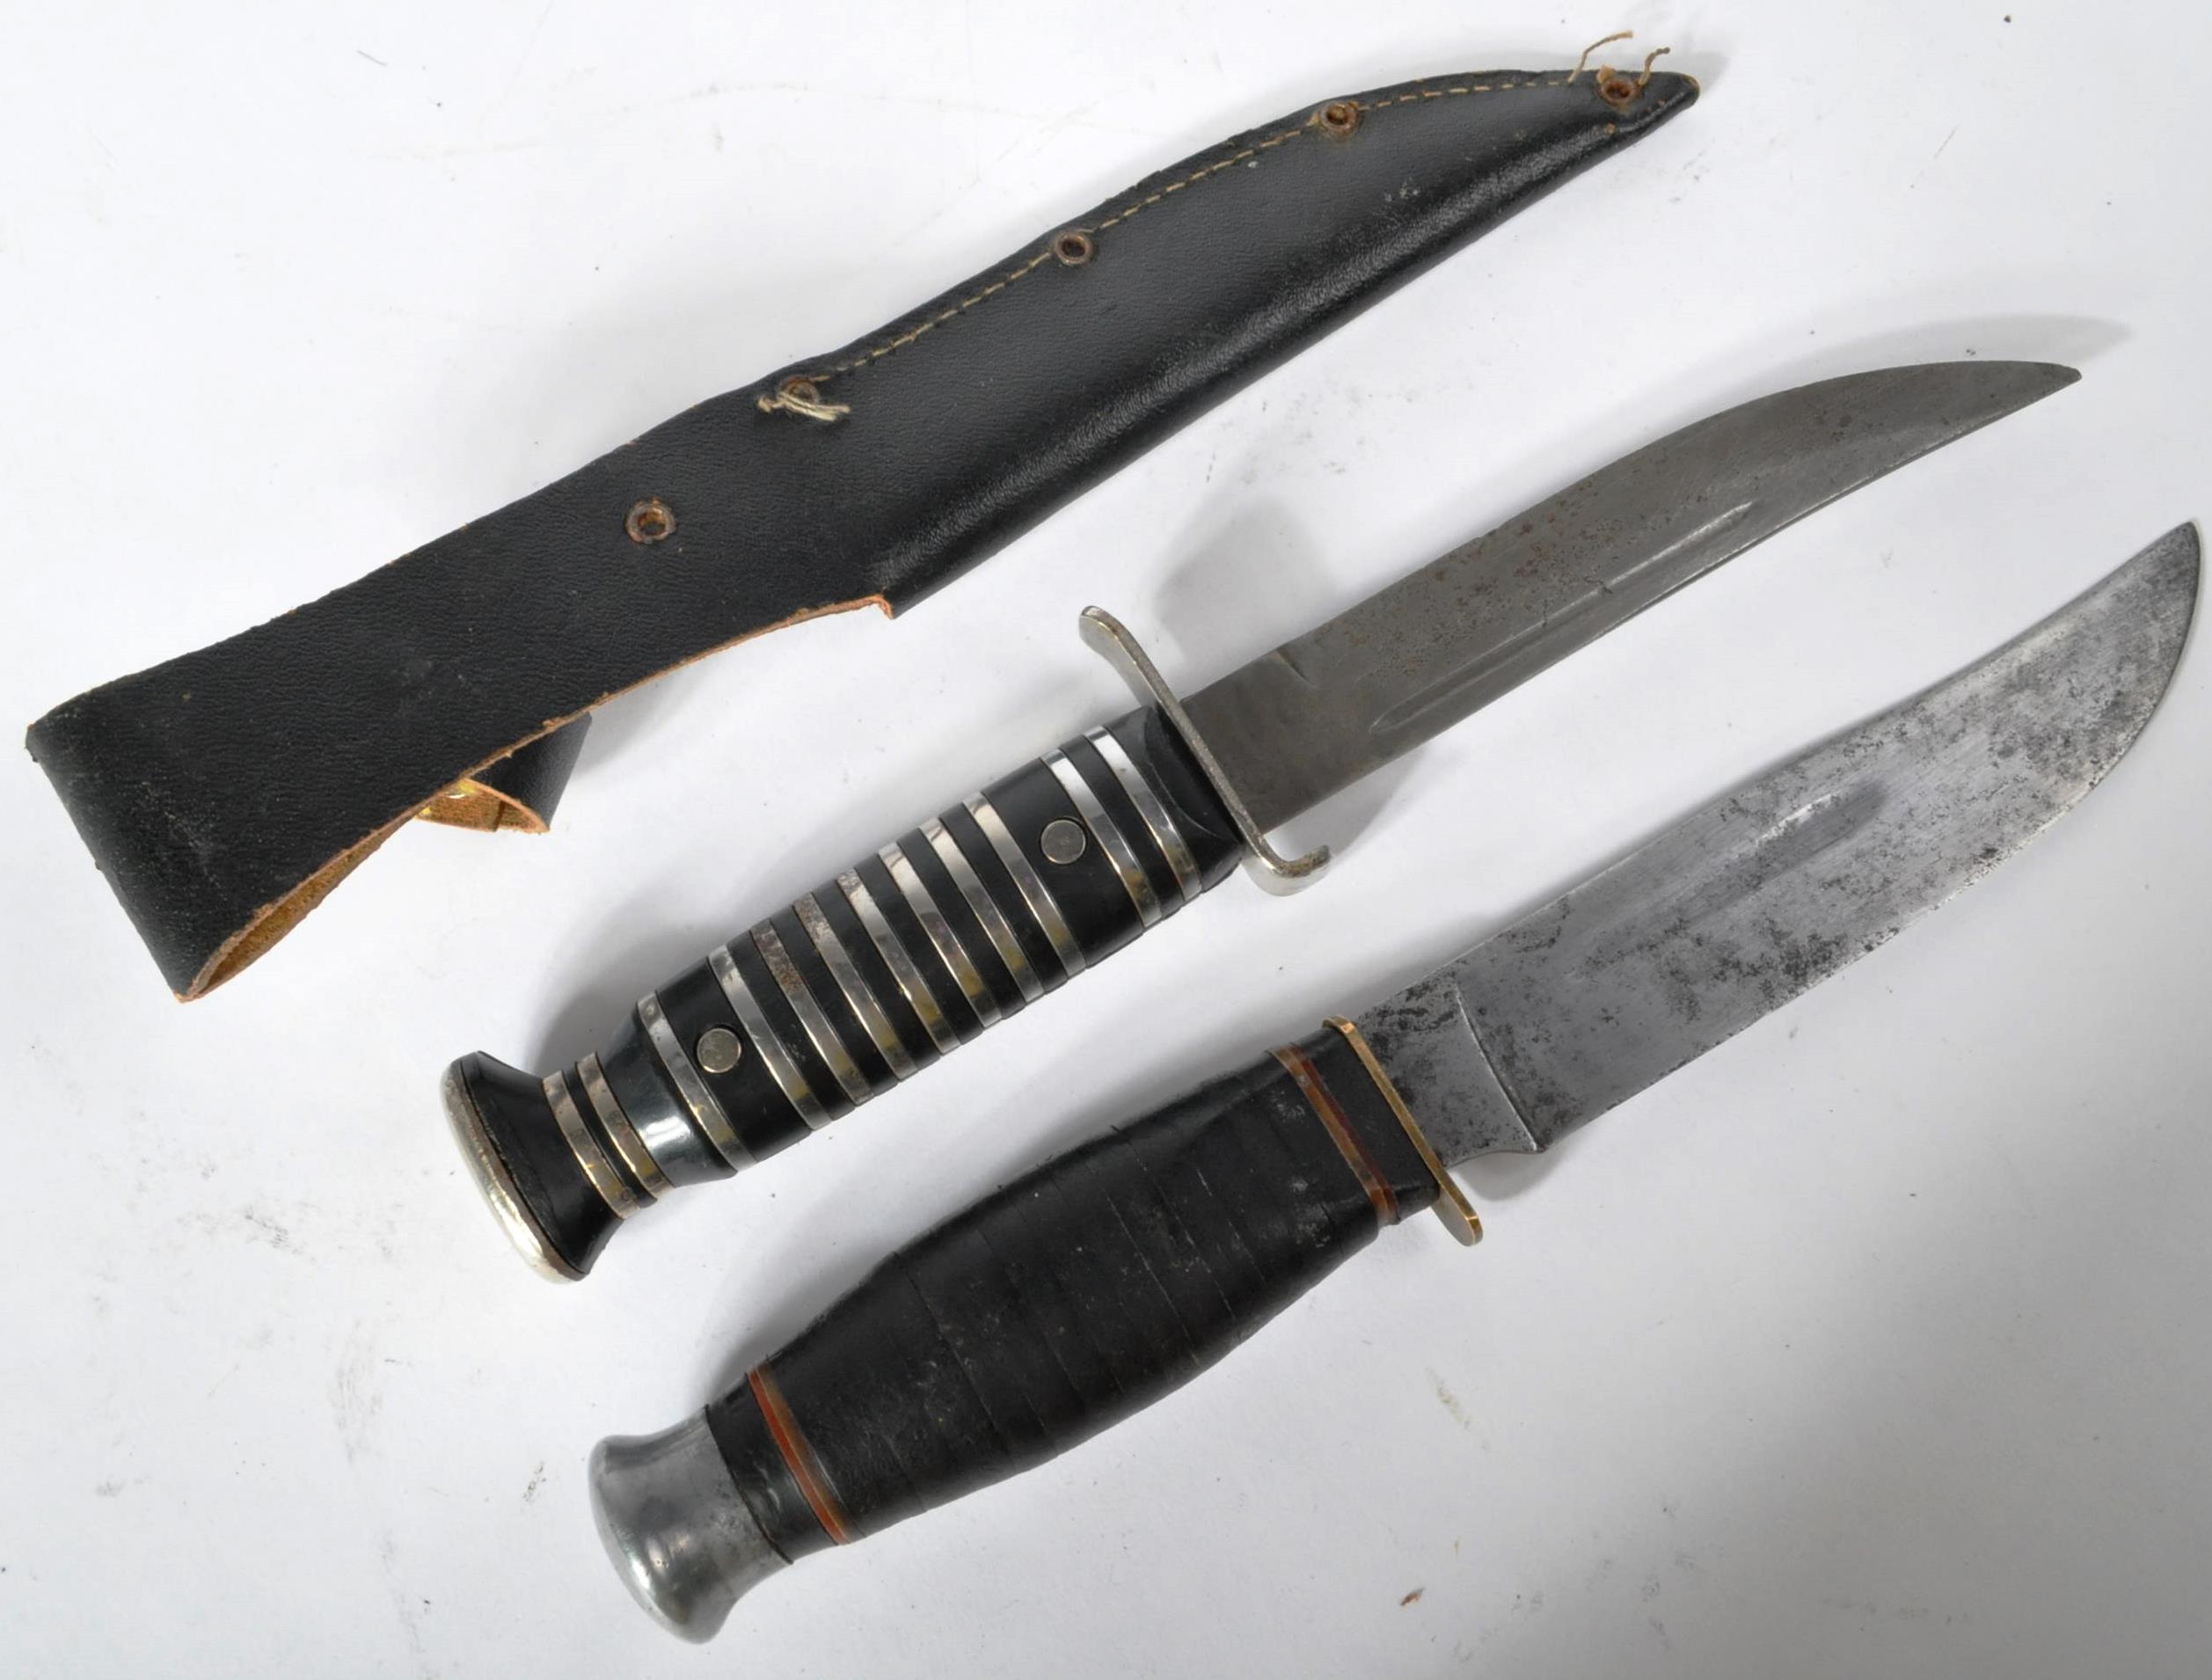 TWO WWII SECOND WORLD WAR THIRD REICH NAZI GERMAN TRENCH KNIVES - Image 6 of 7